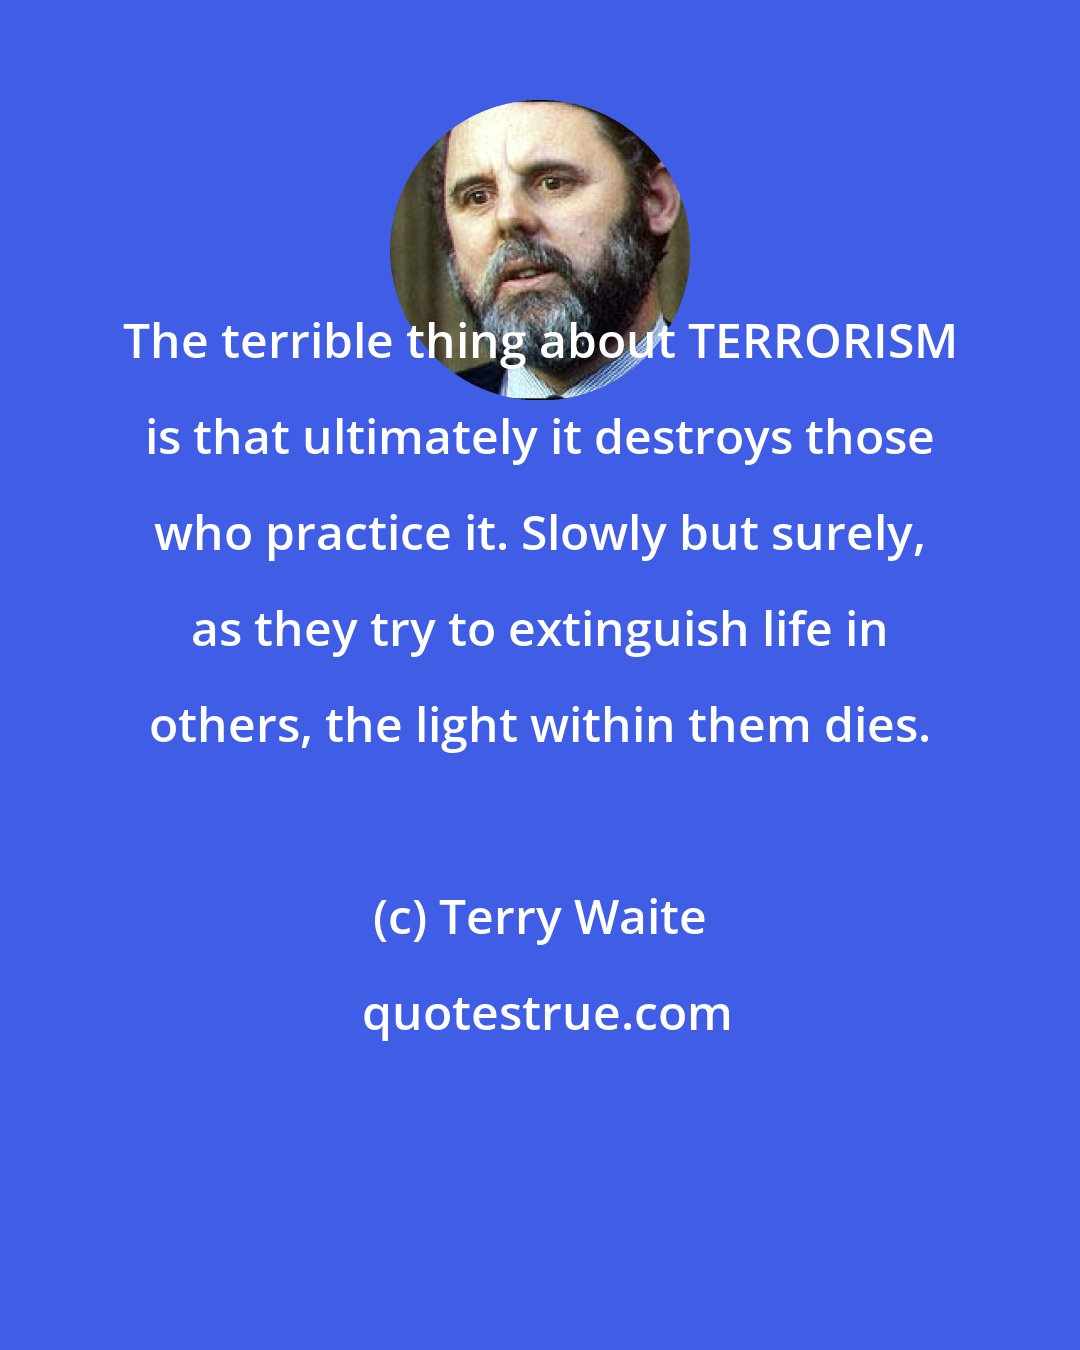 Terry Waite: The terrible thing about TERRORISM is that ultimately it destroys those who practice it. Slowly but surely, as they try to extinguish life in others, the light within them dies.